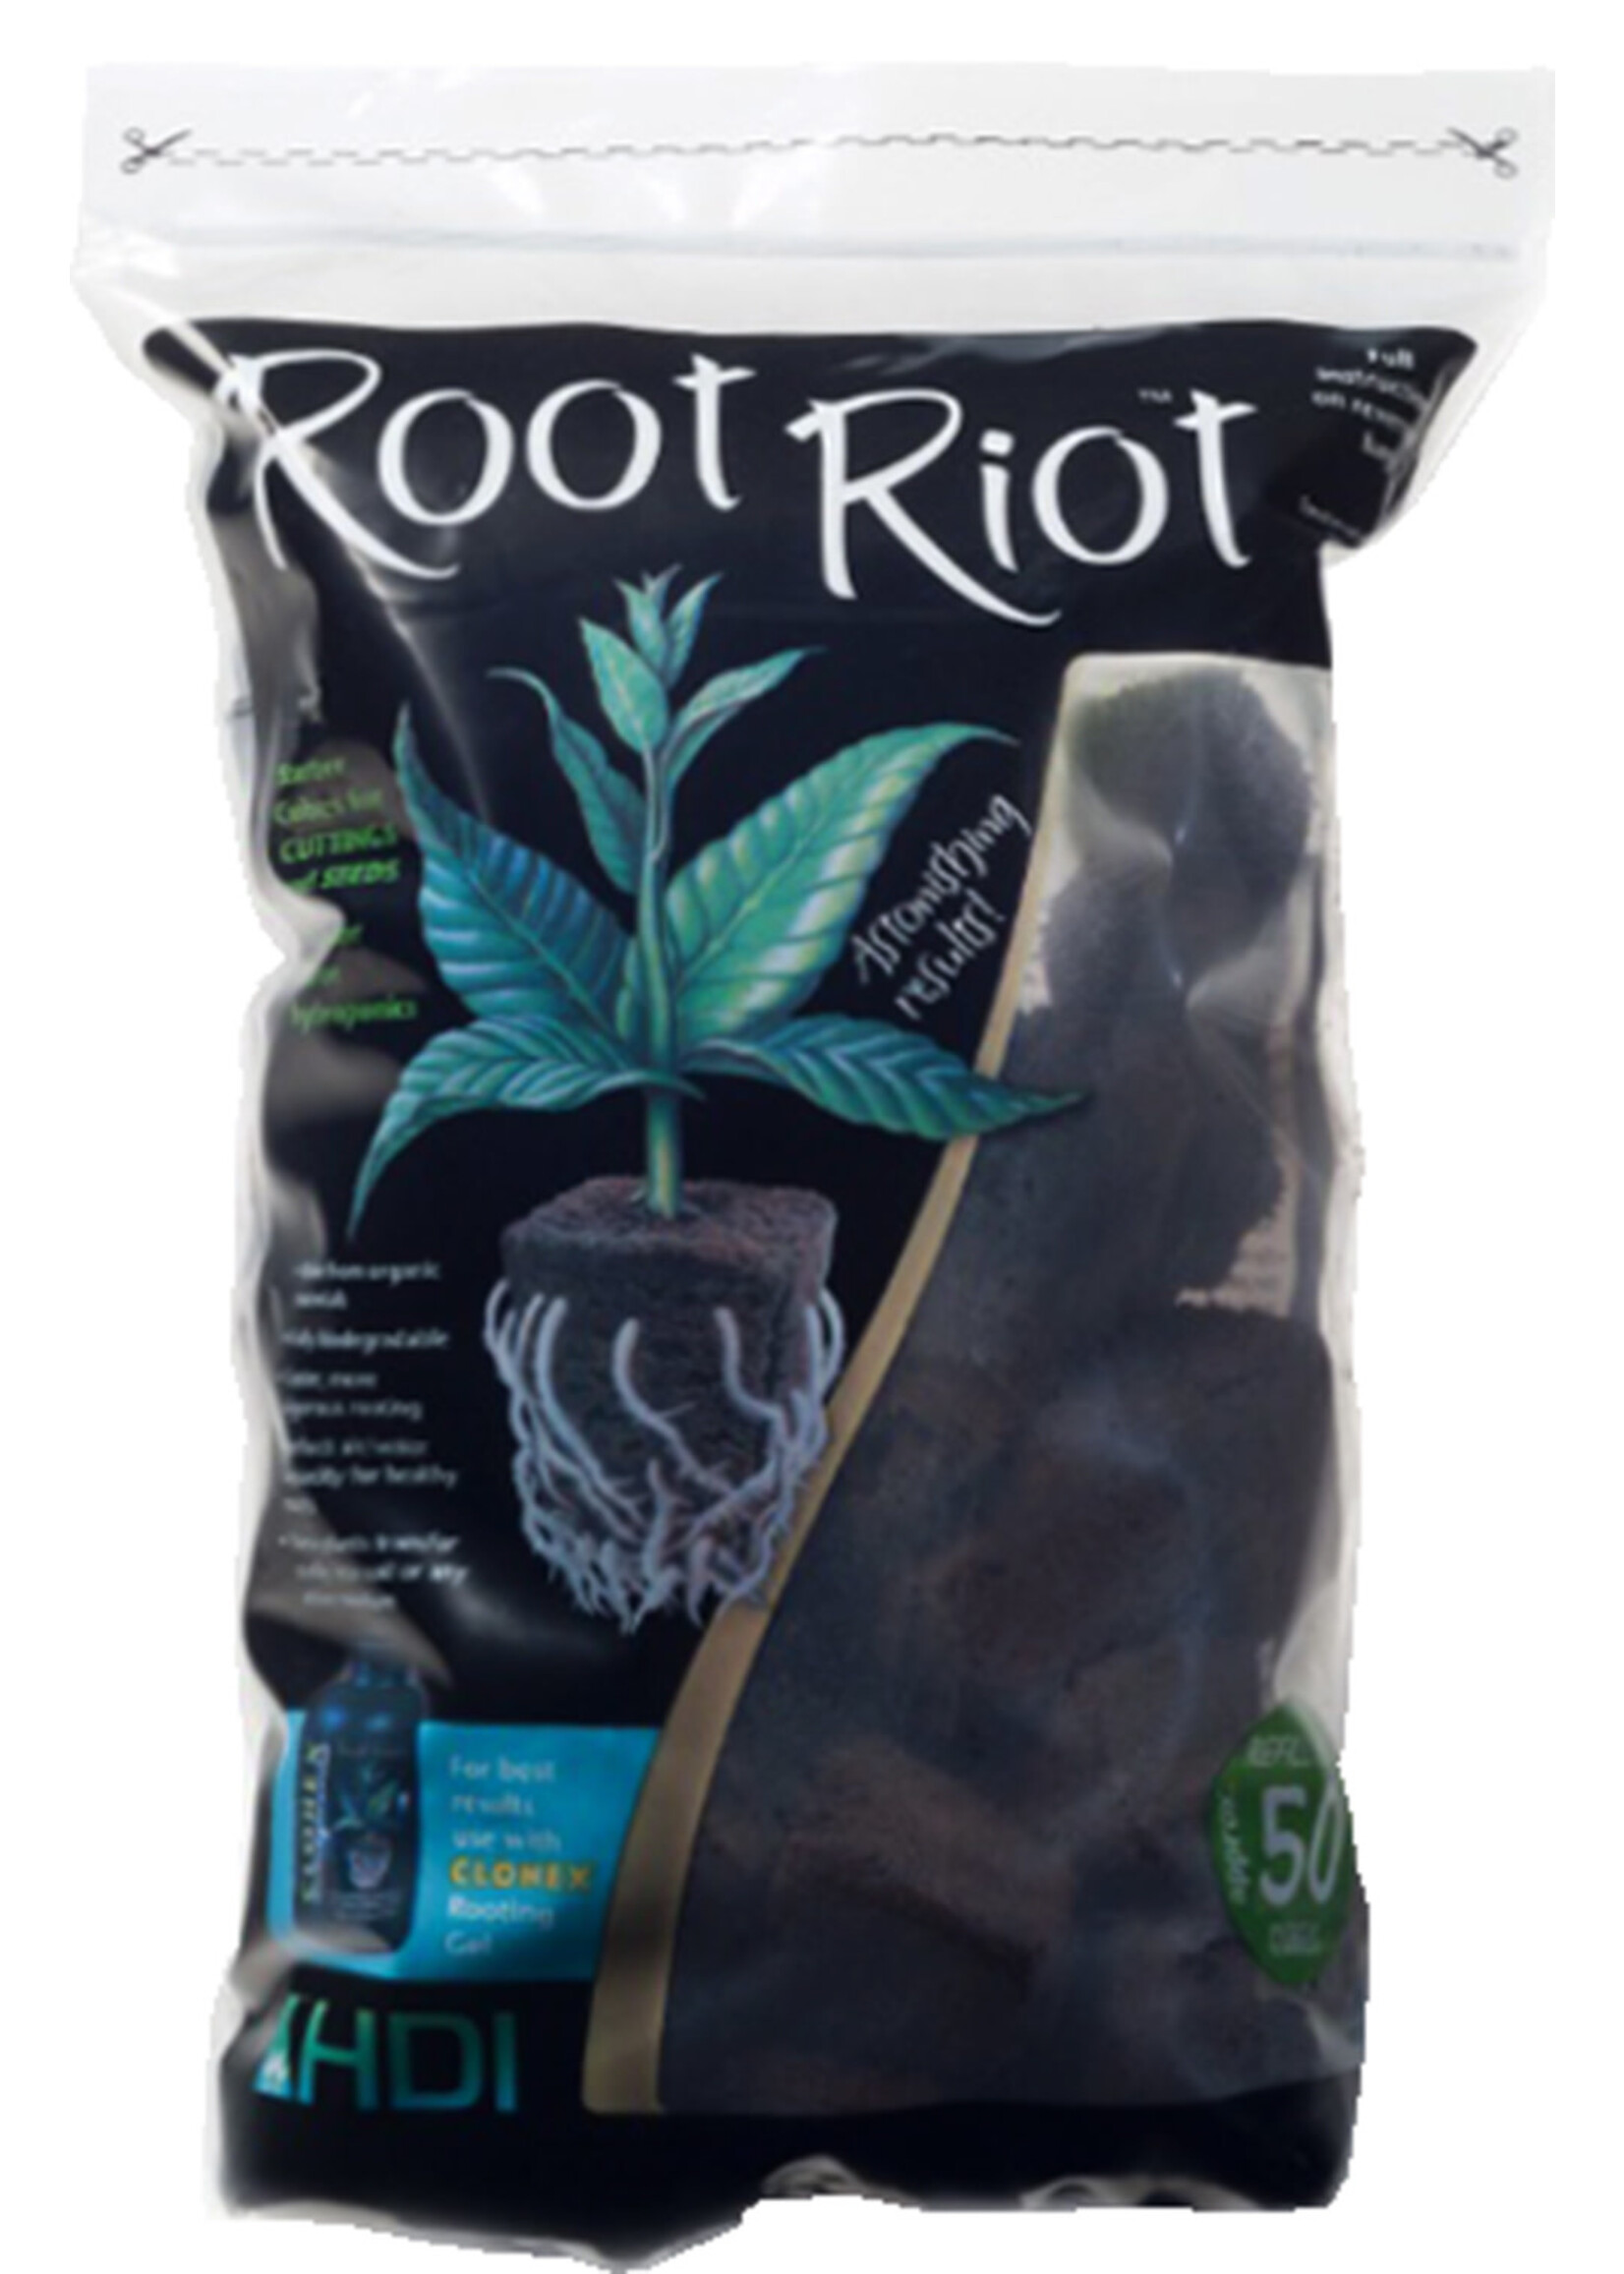 Hydro Dynamics Root Riot Replacement Cubes - 50 Cubes (20/Cs)